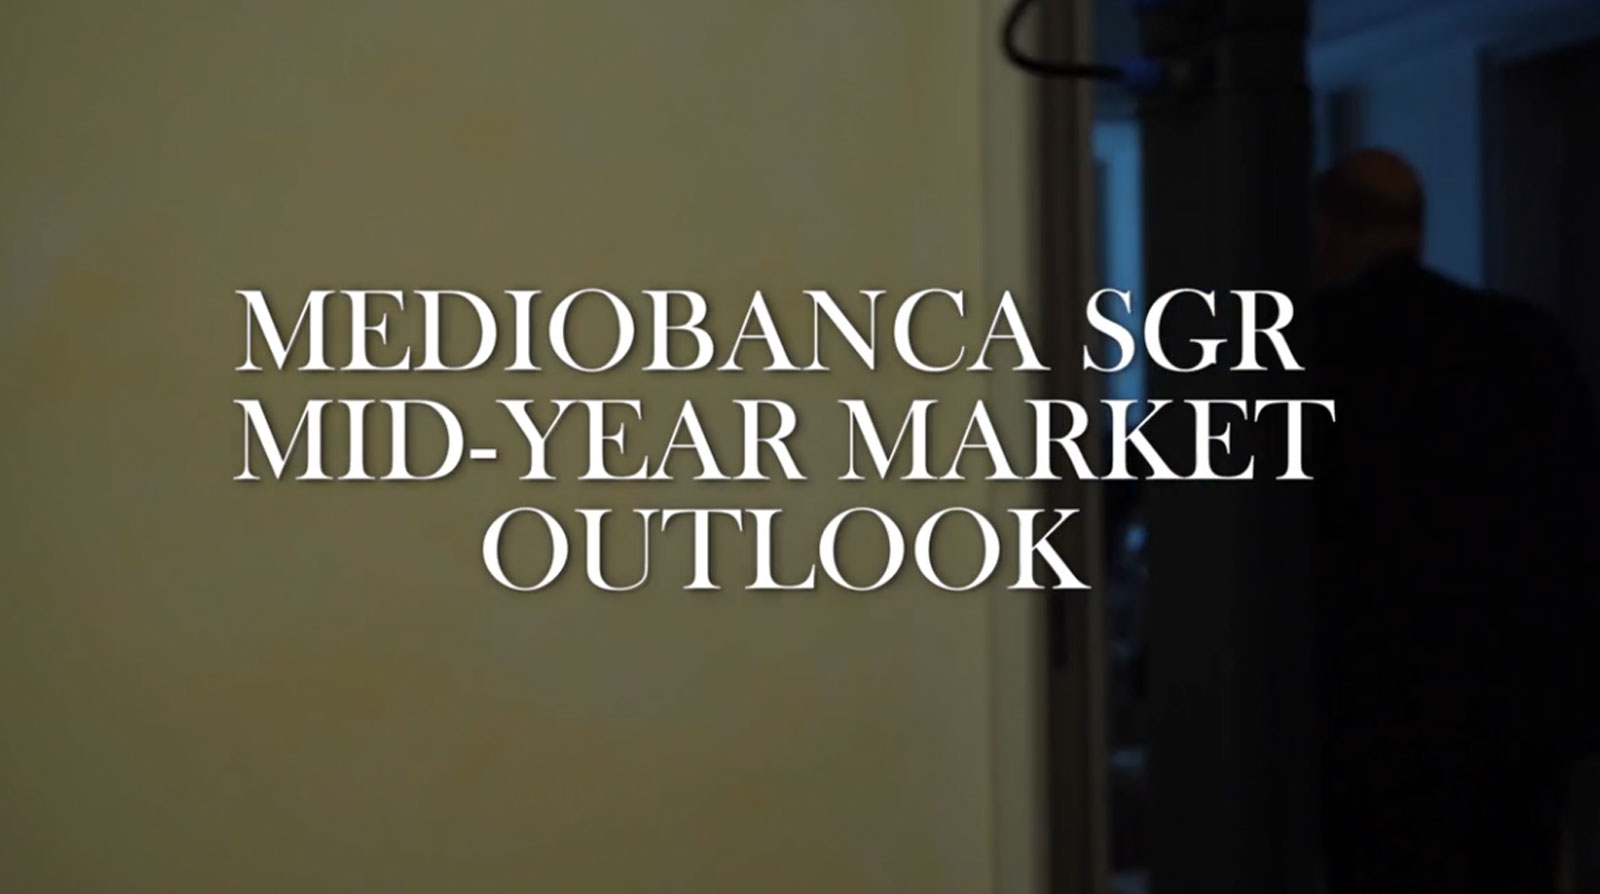 Mid Year market outlook - 2019